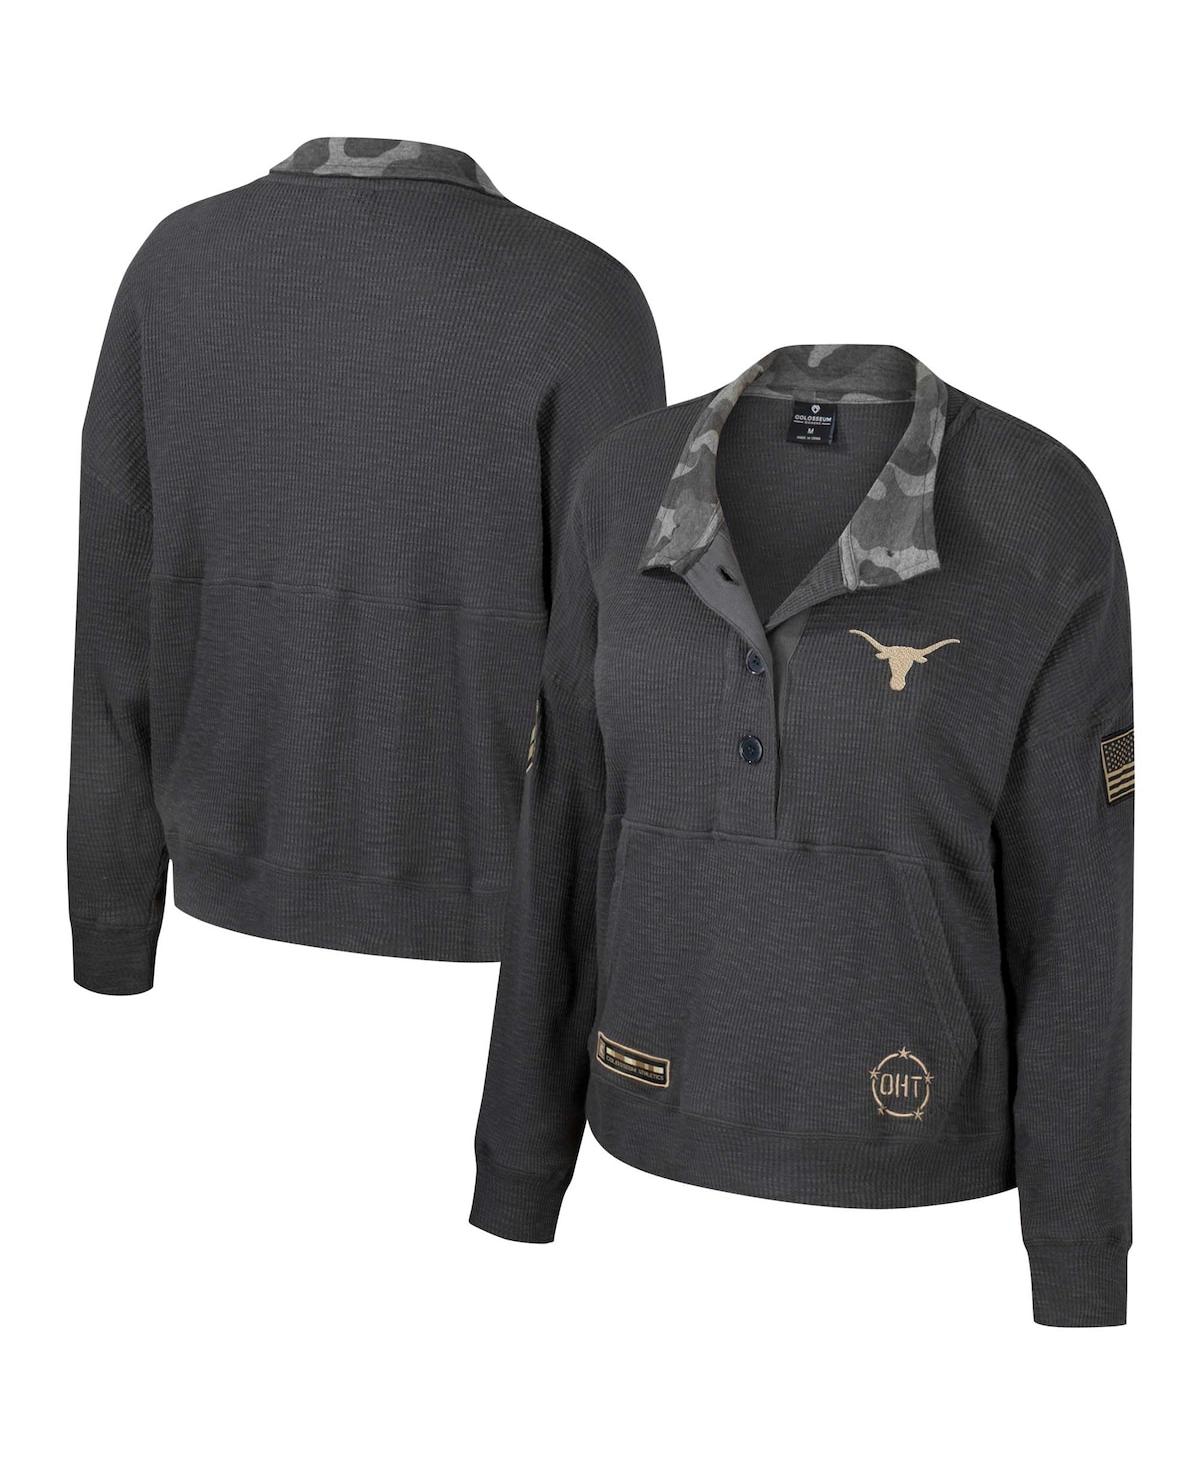 Women's Colosseum Heather Charcoal Texas Longhorns Oht Military-Inspired Appreciation Payback Henley Thermal Sweatshirt - Heather Charcoal